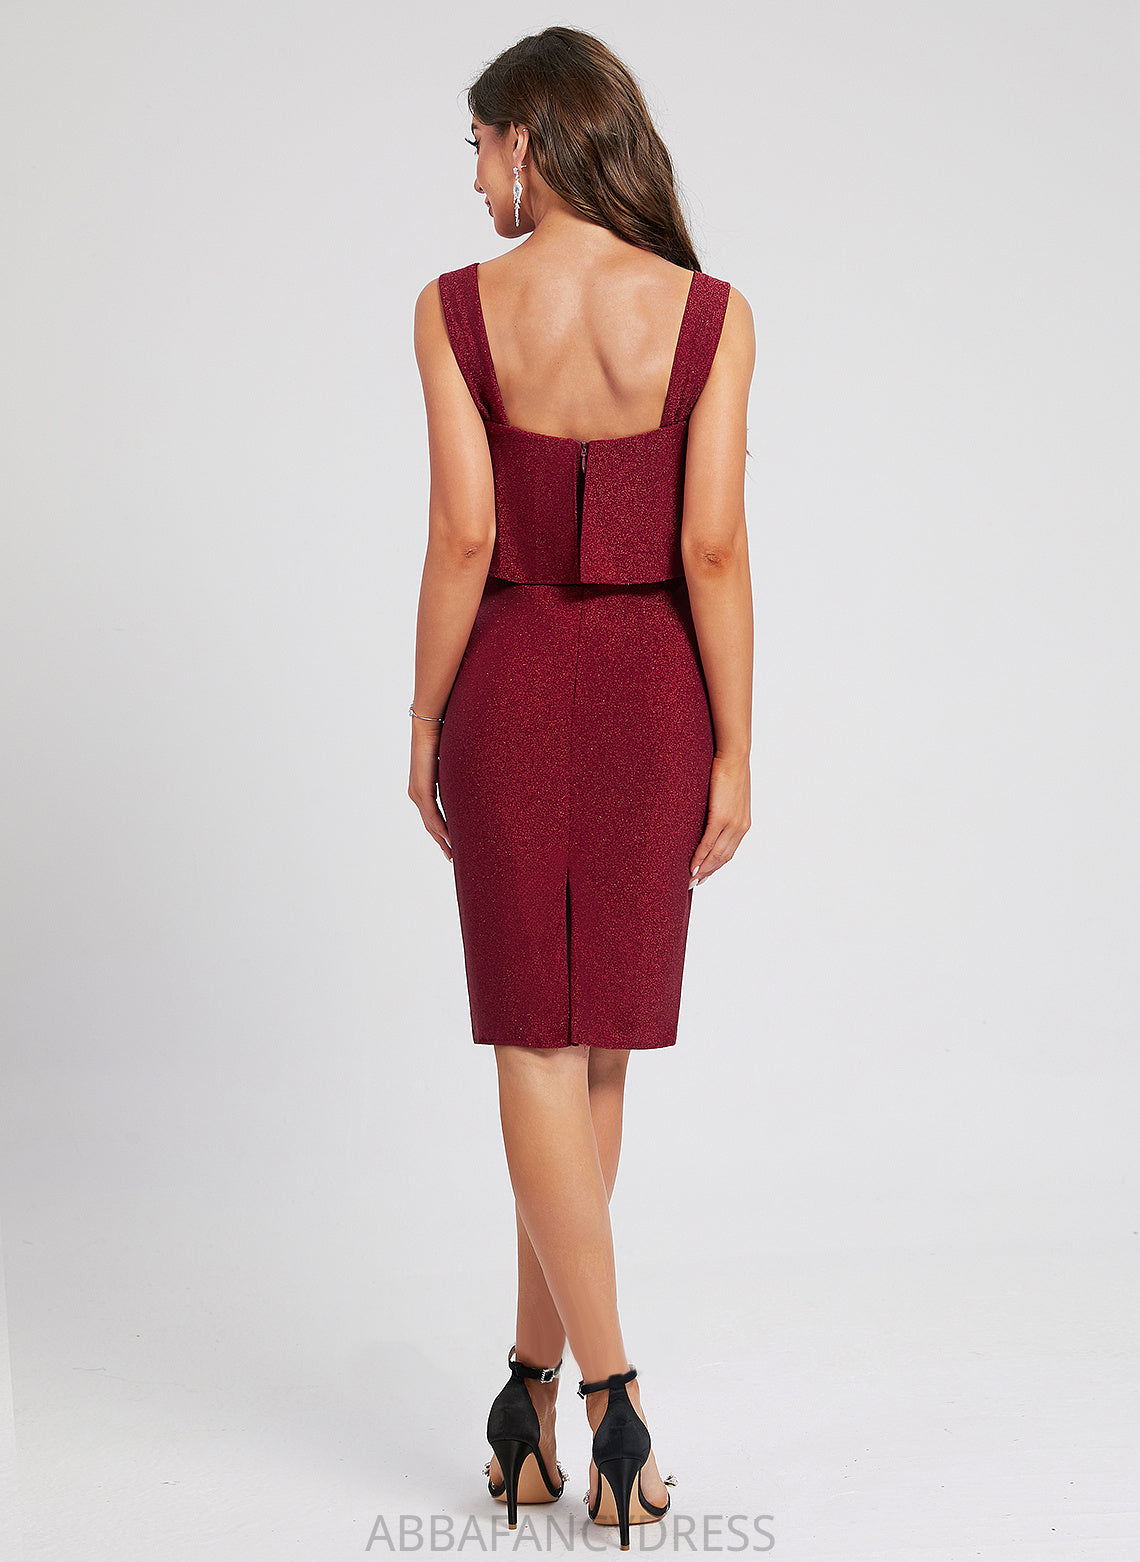 Club Dresses Juliana With Ruffle Square Knee-Length Dress Neckline Polyester Bodycon Cocktail